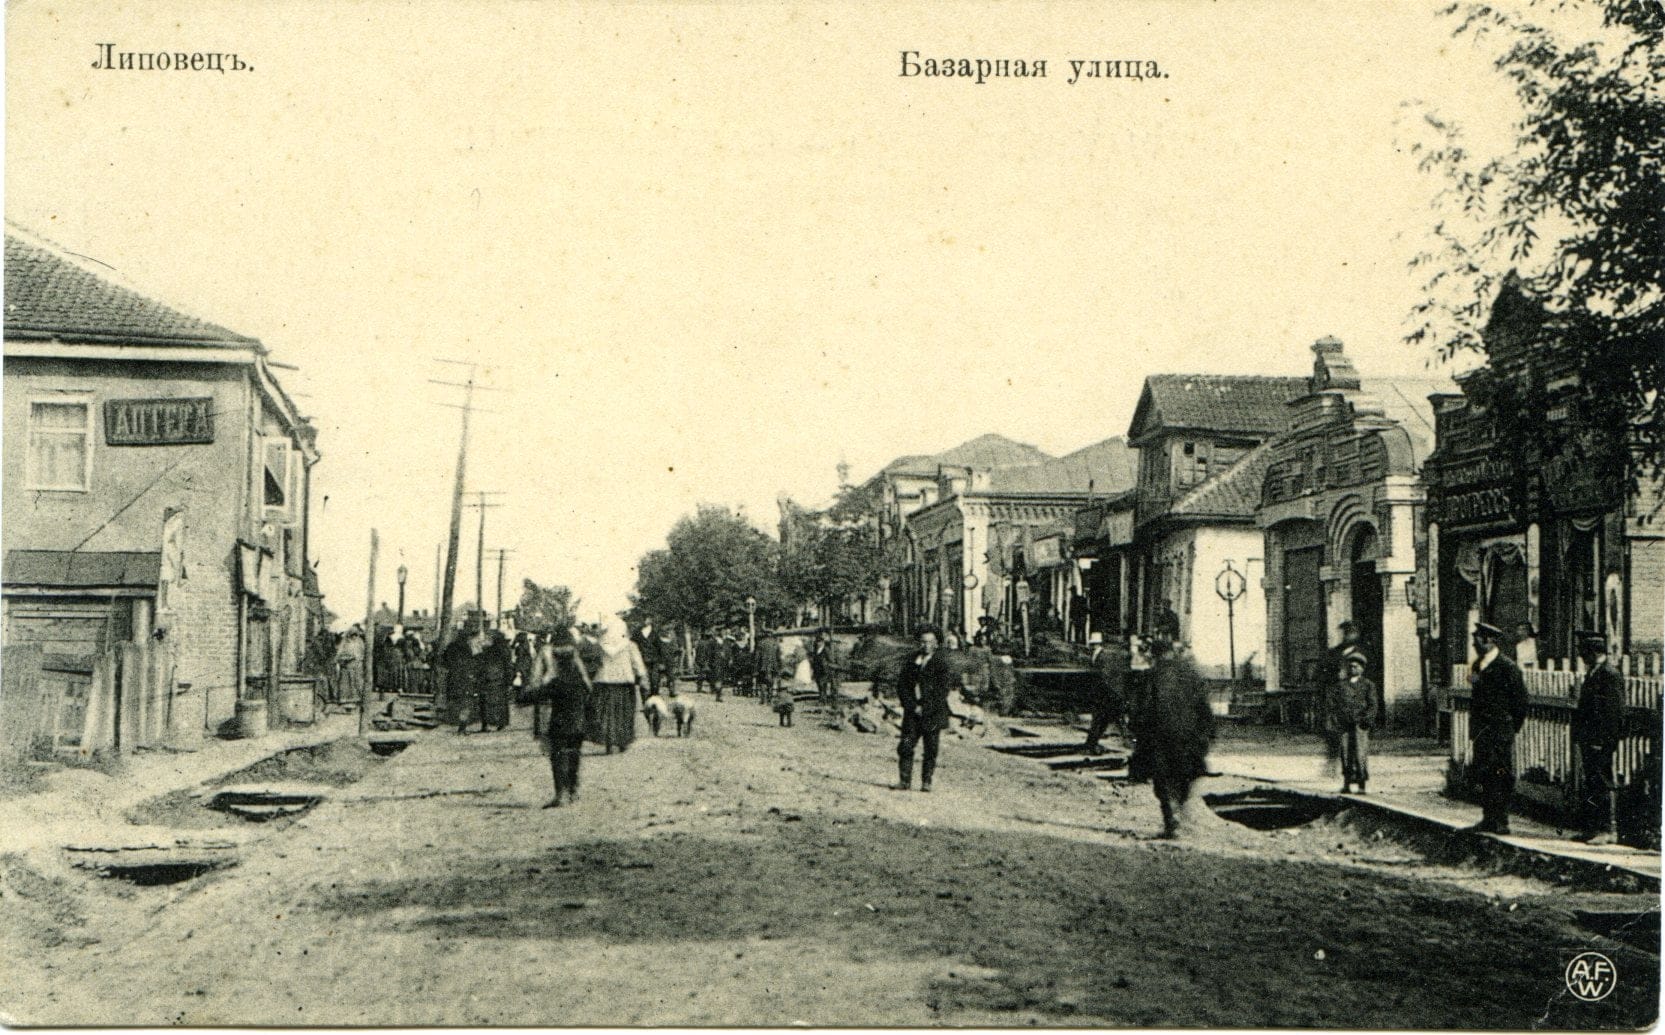 Market Square in the town of Lypovets, early 20th century